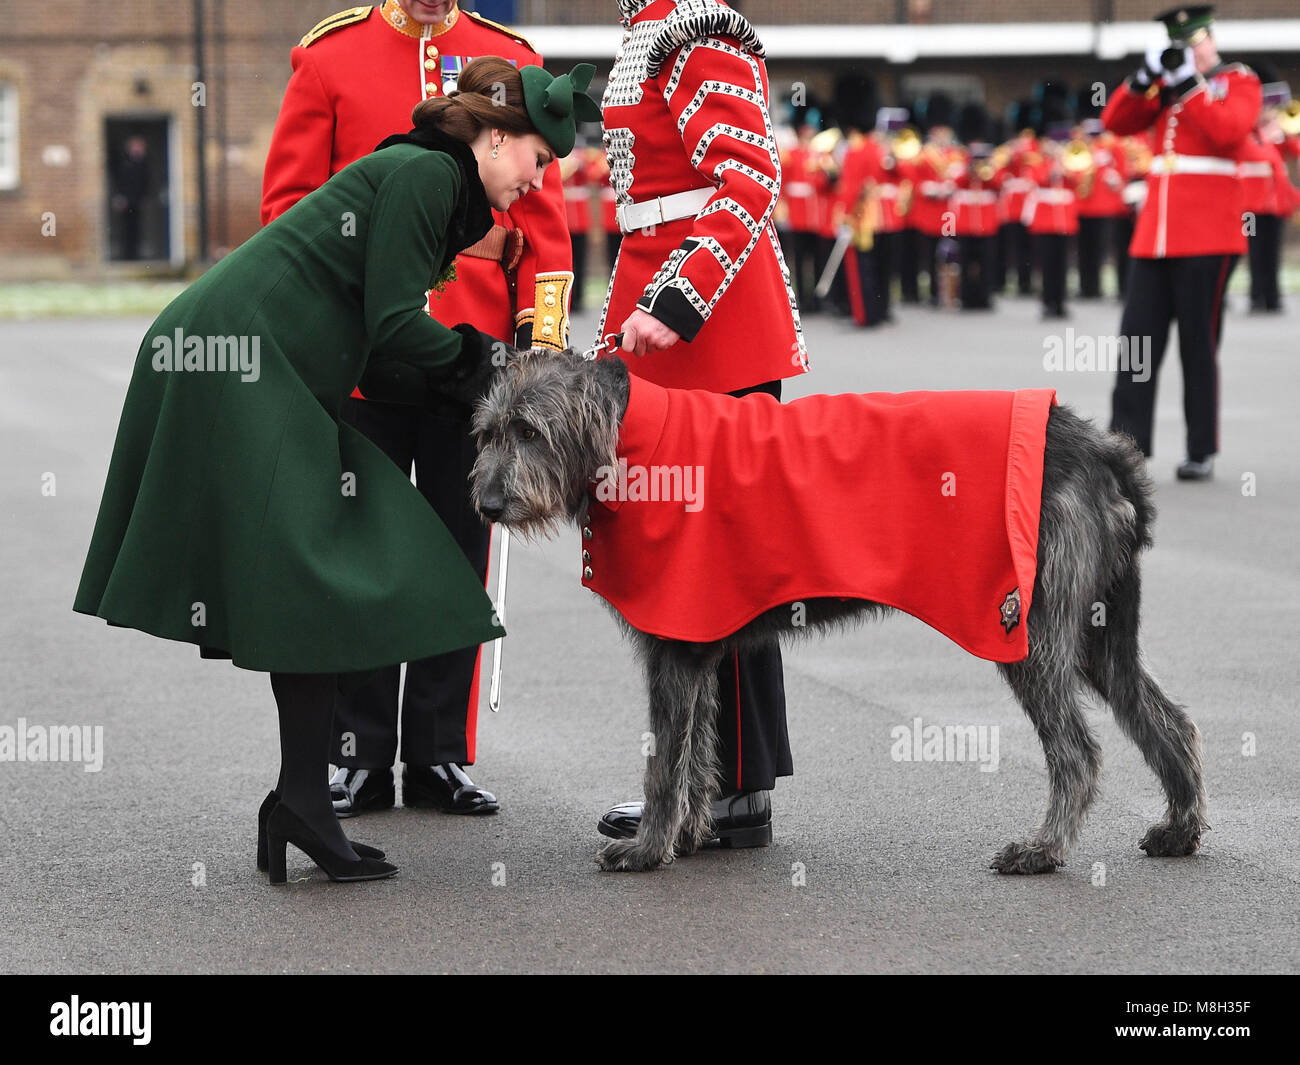 The Duchess of Cambridge presents a shamrock to Irish Guards mascot, Irish Wolfhound Domhnall, as she attends the regiment's St Patrick's Day parade at Cavalry Barracks in Hounslow, to present shamrock to officers and guardsmen of 1st Battalion the Irish Guards. Stock Photo